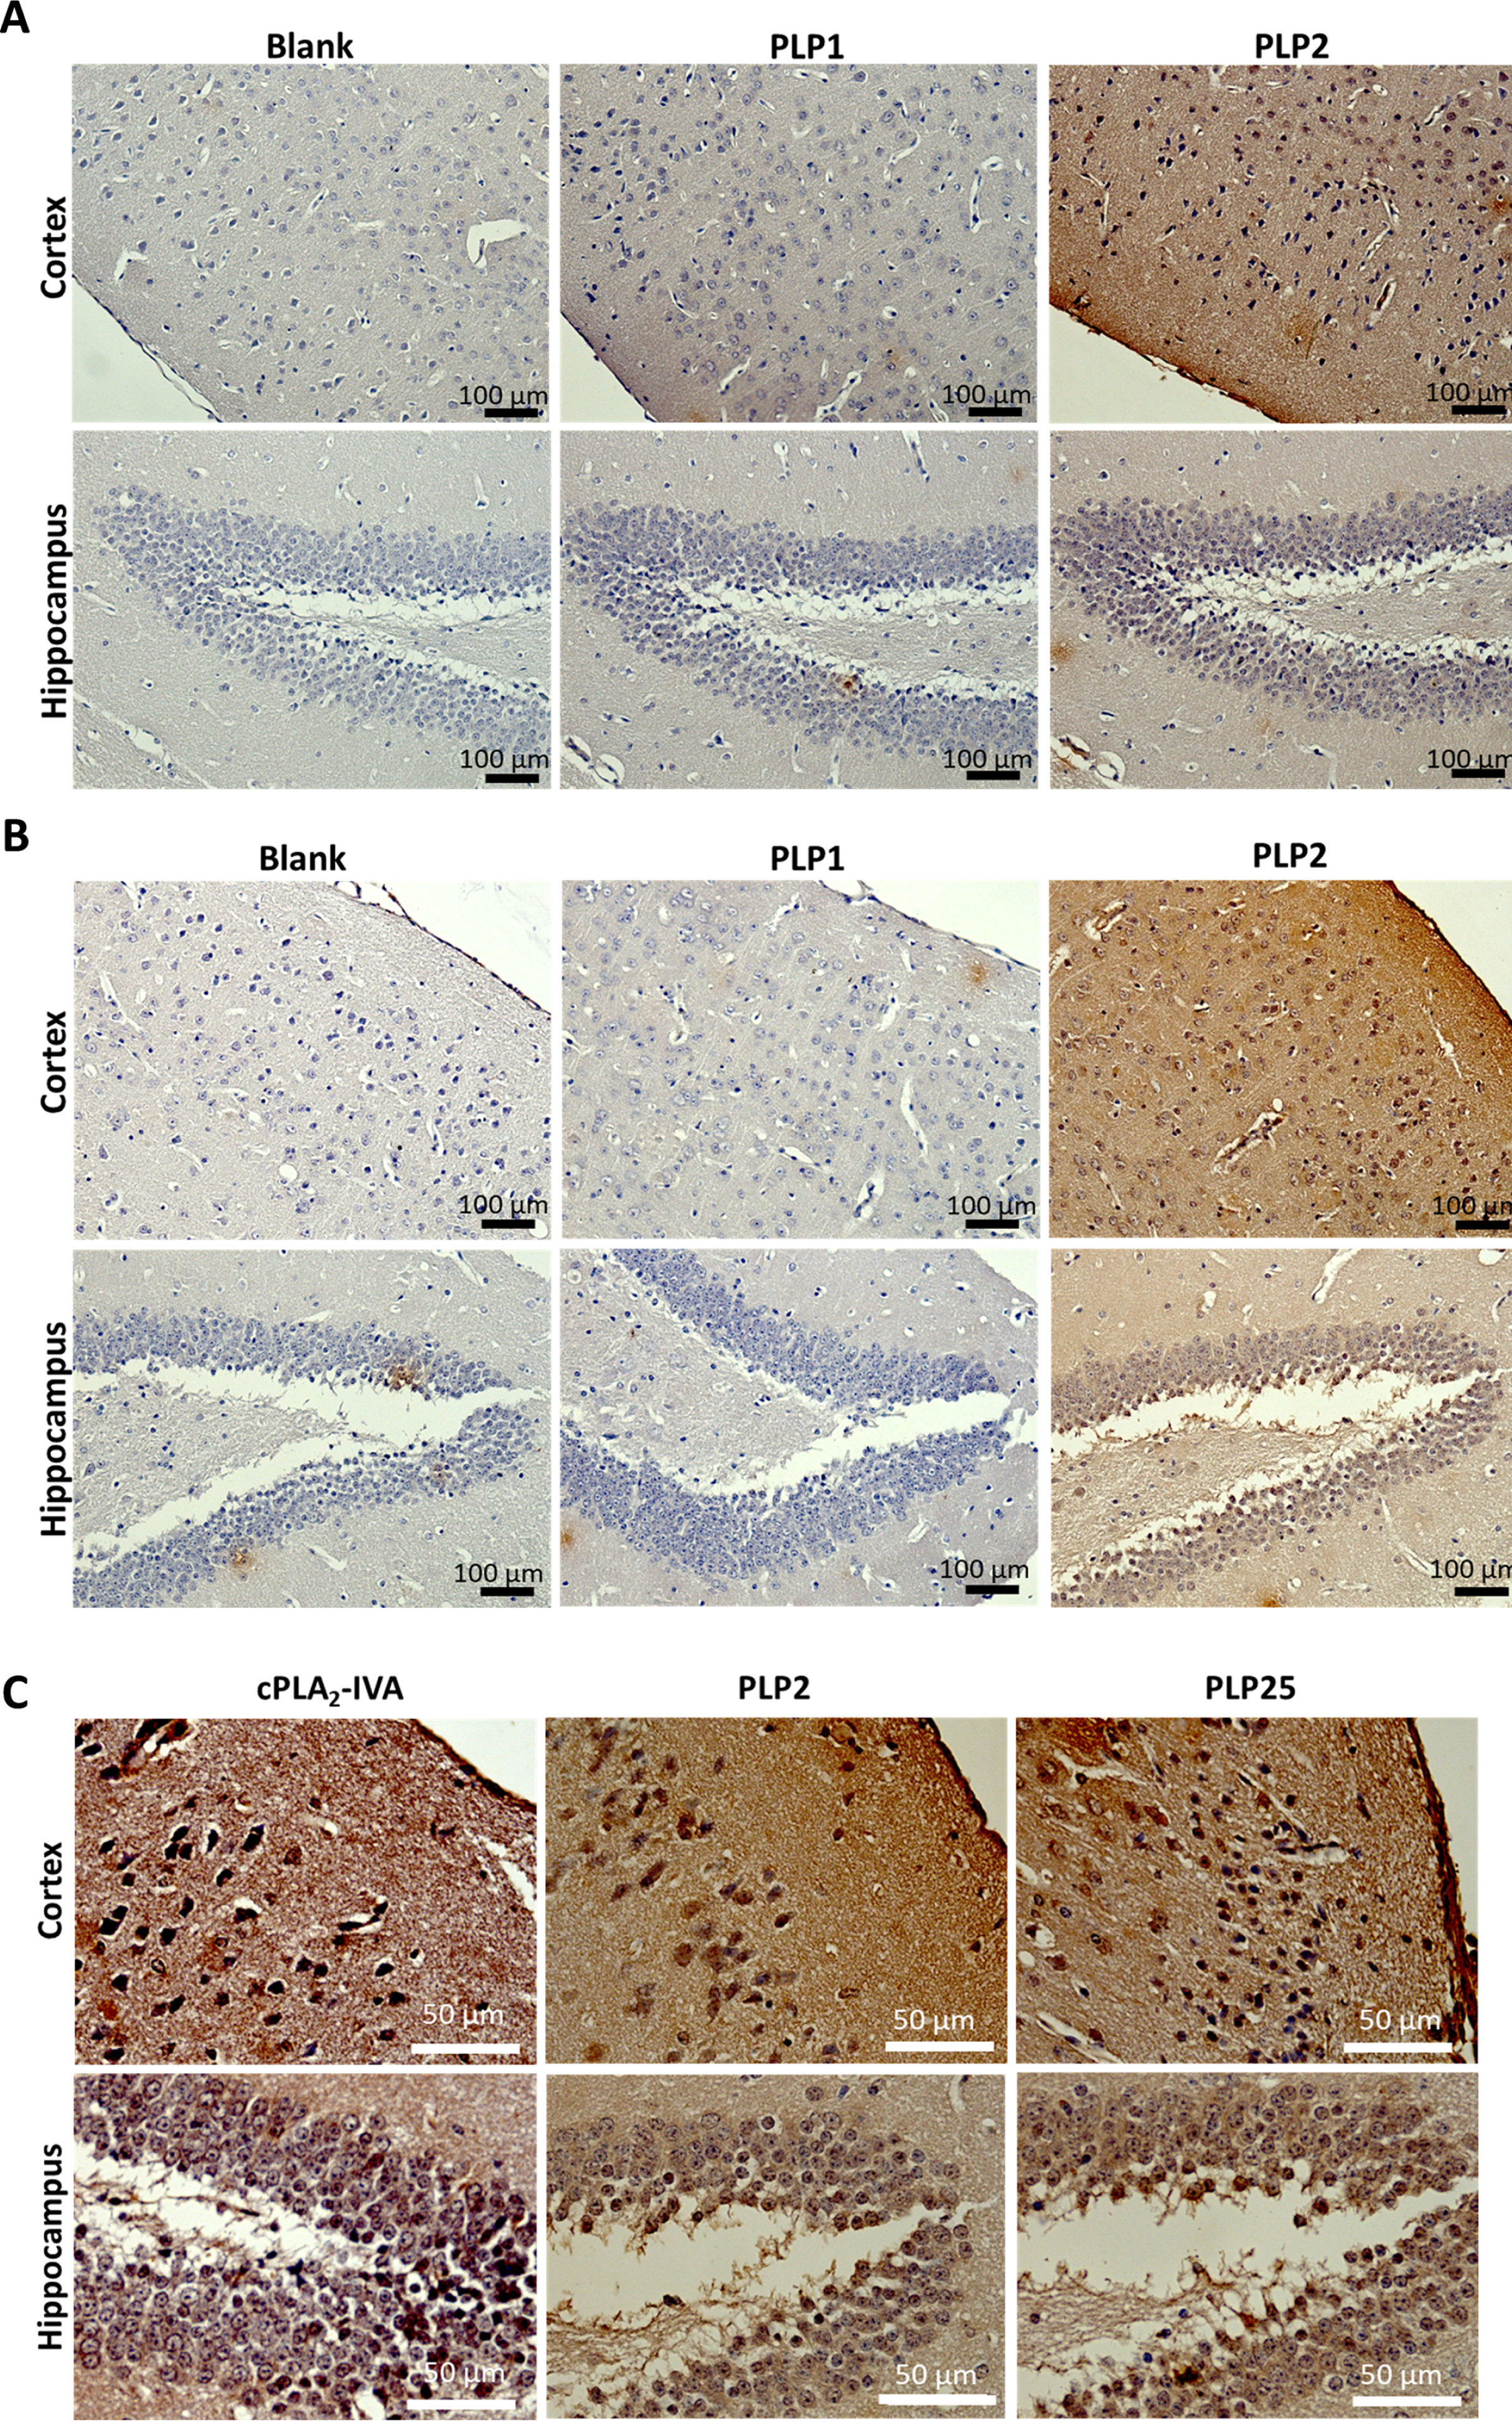 Detection of PLP1, PLP2, and PLP25 binding to NMRI (A) or APP/PS1 (B) brain slices. Peptides are in brown, highlighted by DAB. C) Comparison of the cPLA2-IVA staining with those obtained for PLP2 and PLP25 peptides in the cortex and the hippocampus of APP/PS1 mice.